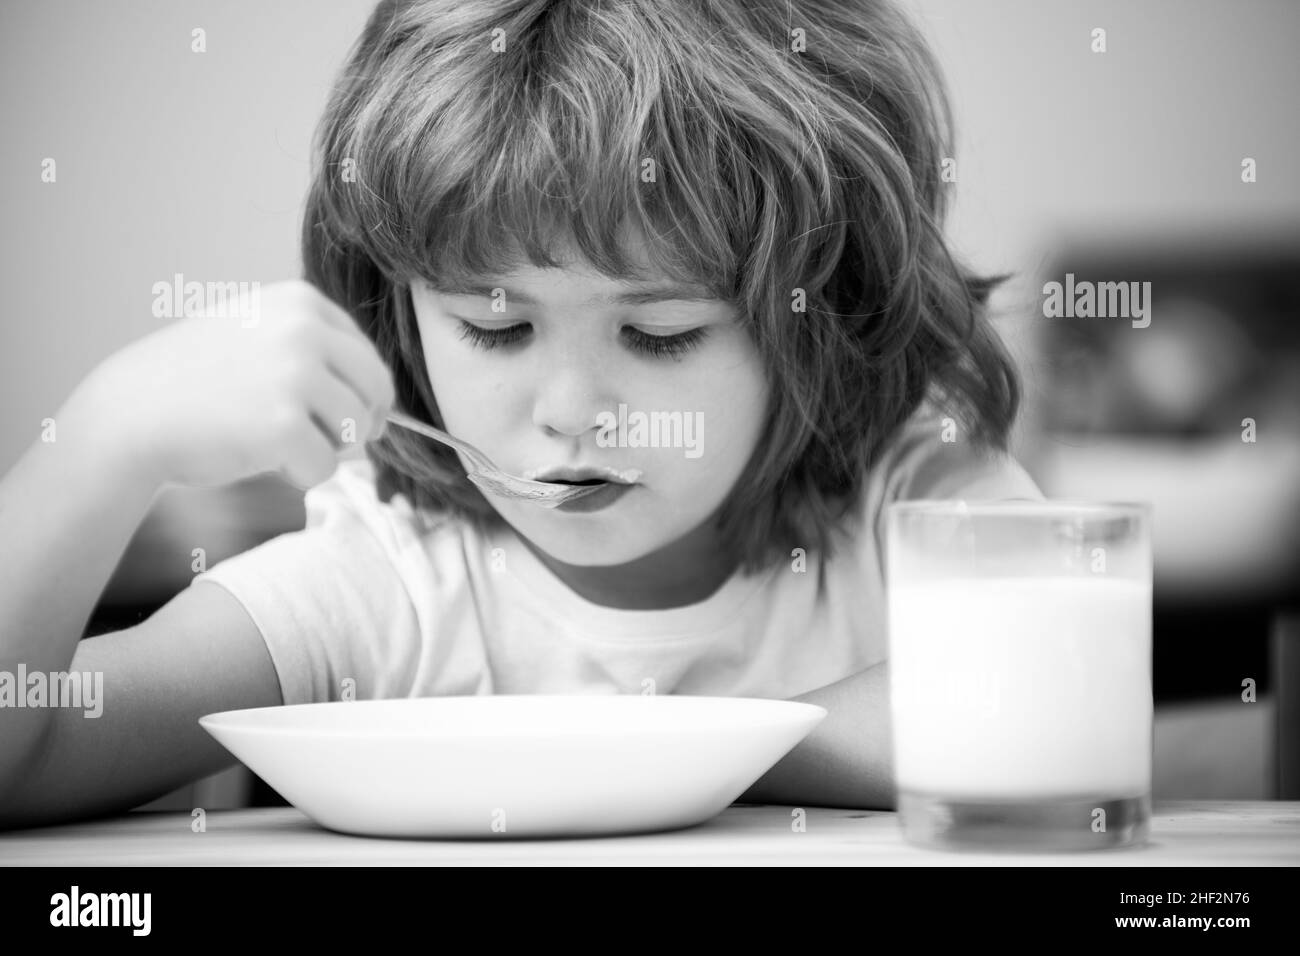 Caucasian toddler child boy eating healthy soup in the kitchen. Stock Photo